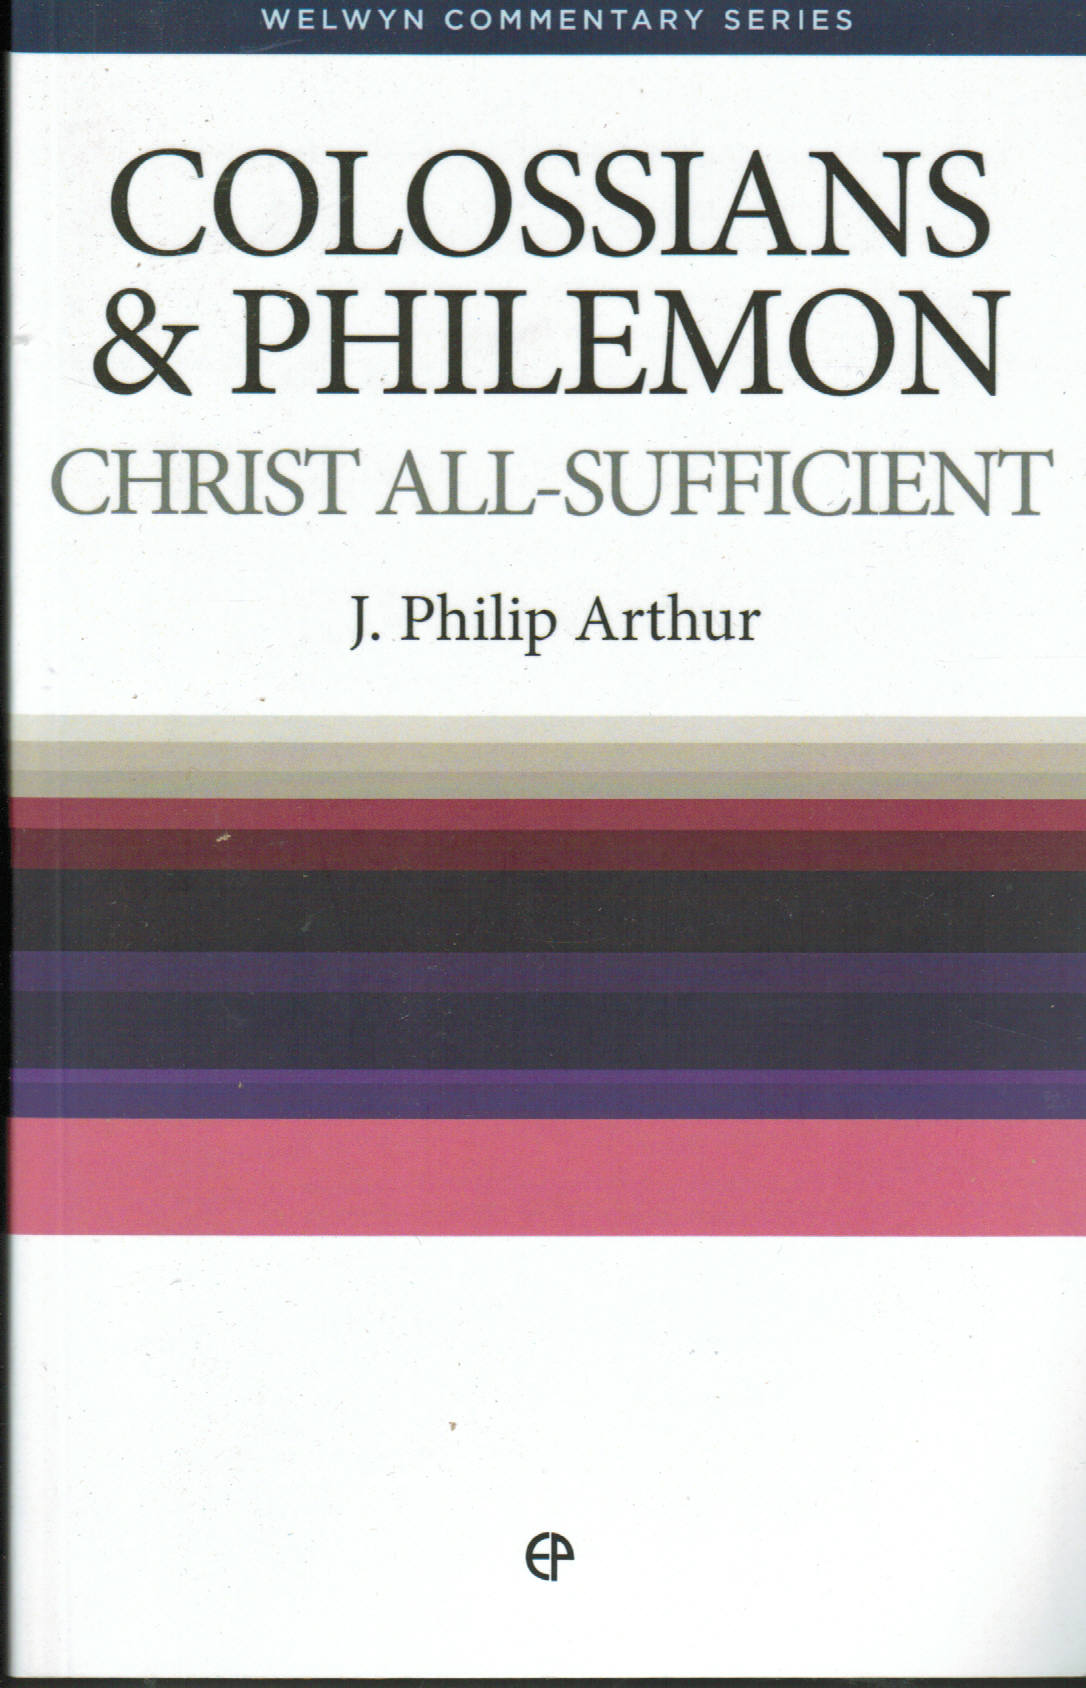 Welwyn Commentary Series - Colossians & Philemon: Christ All-Sufficient